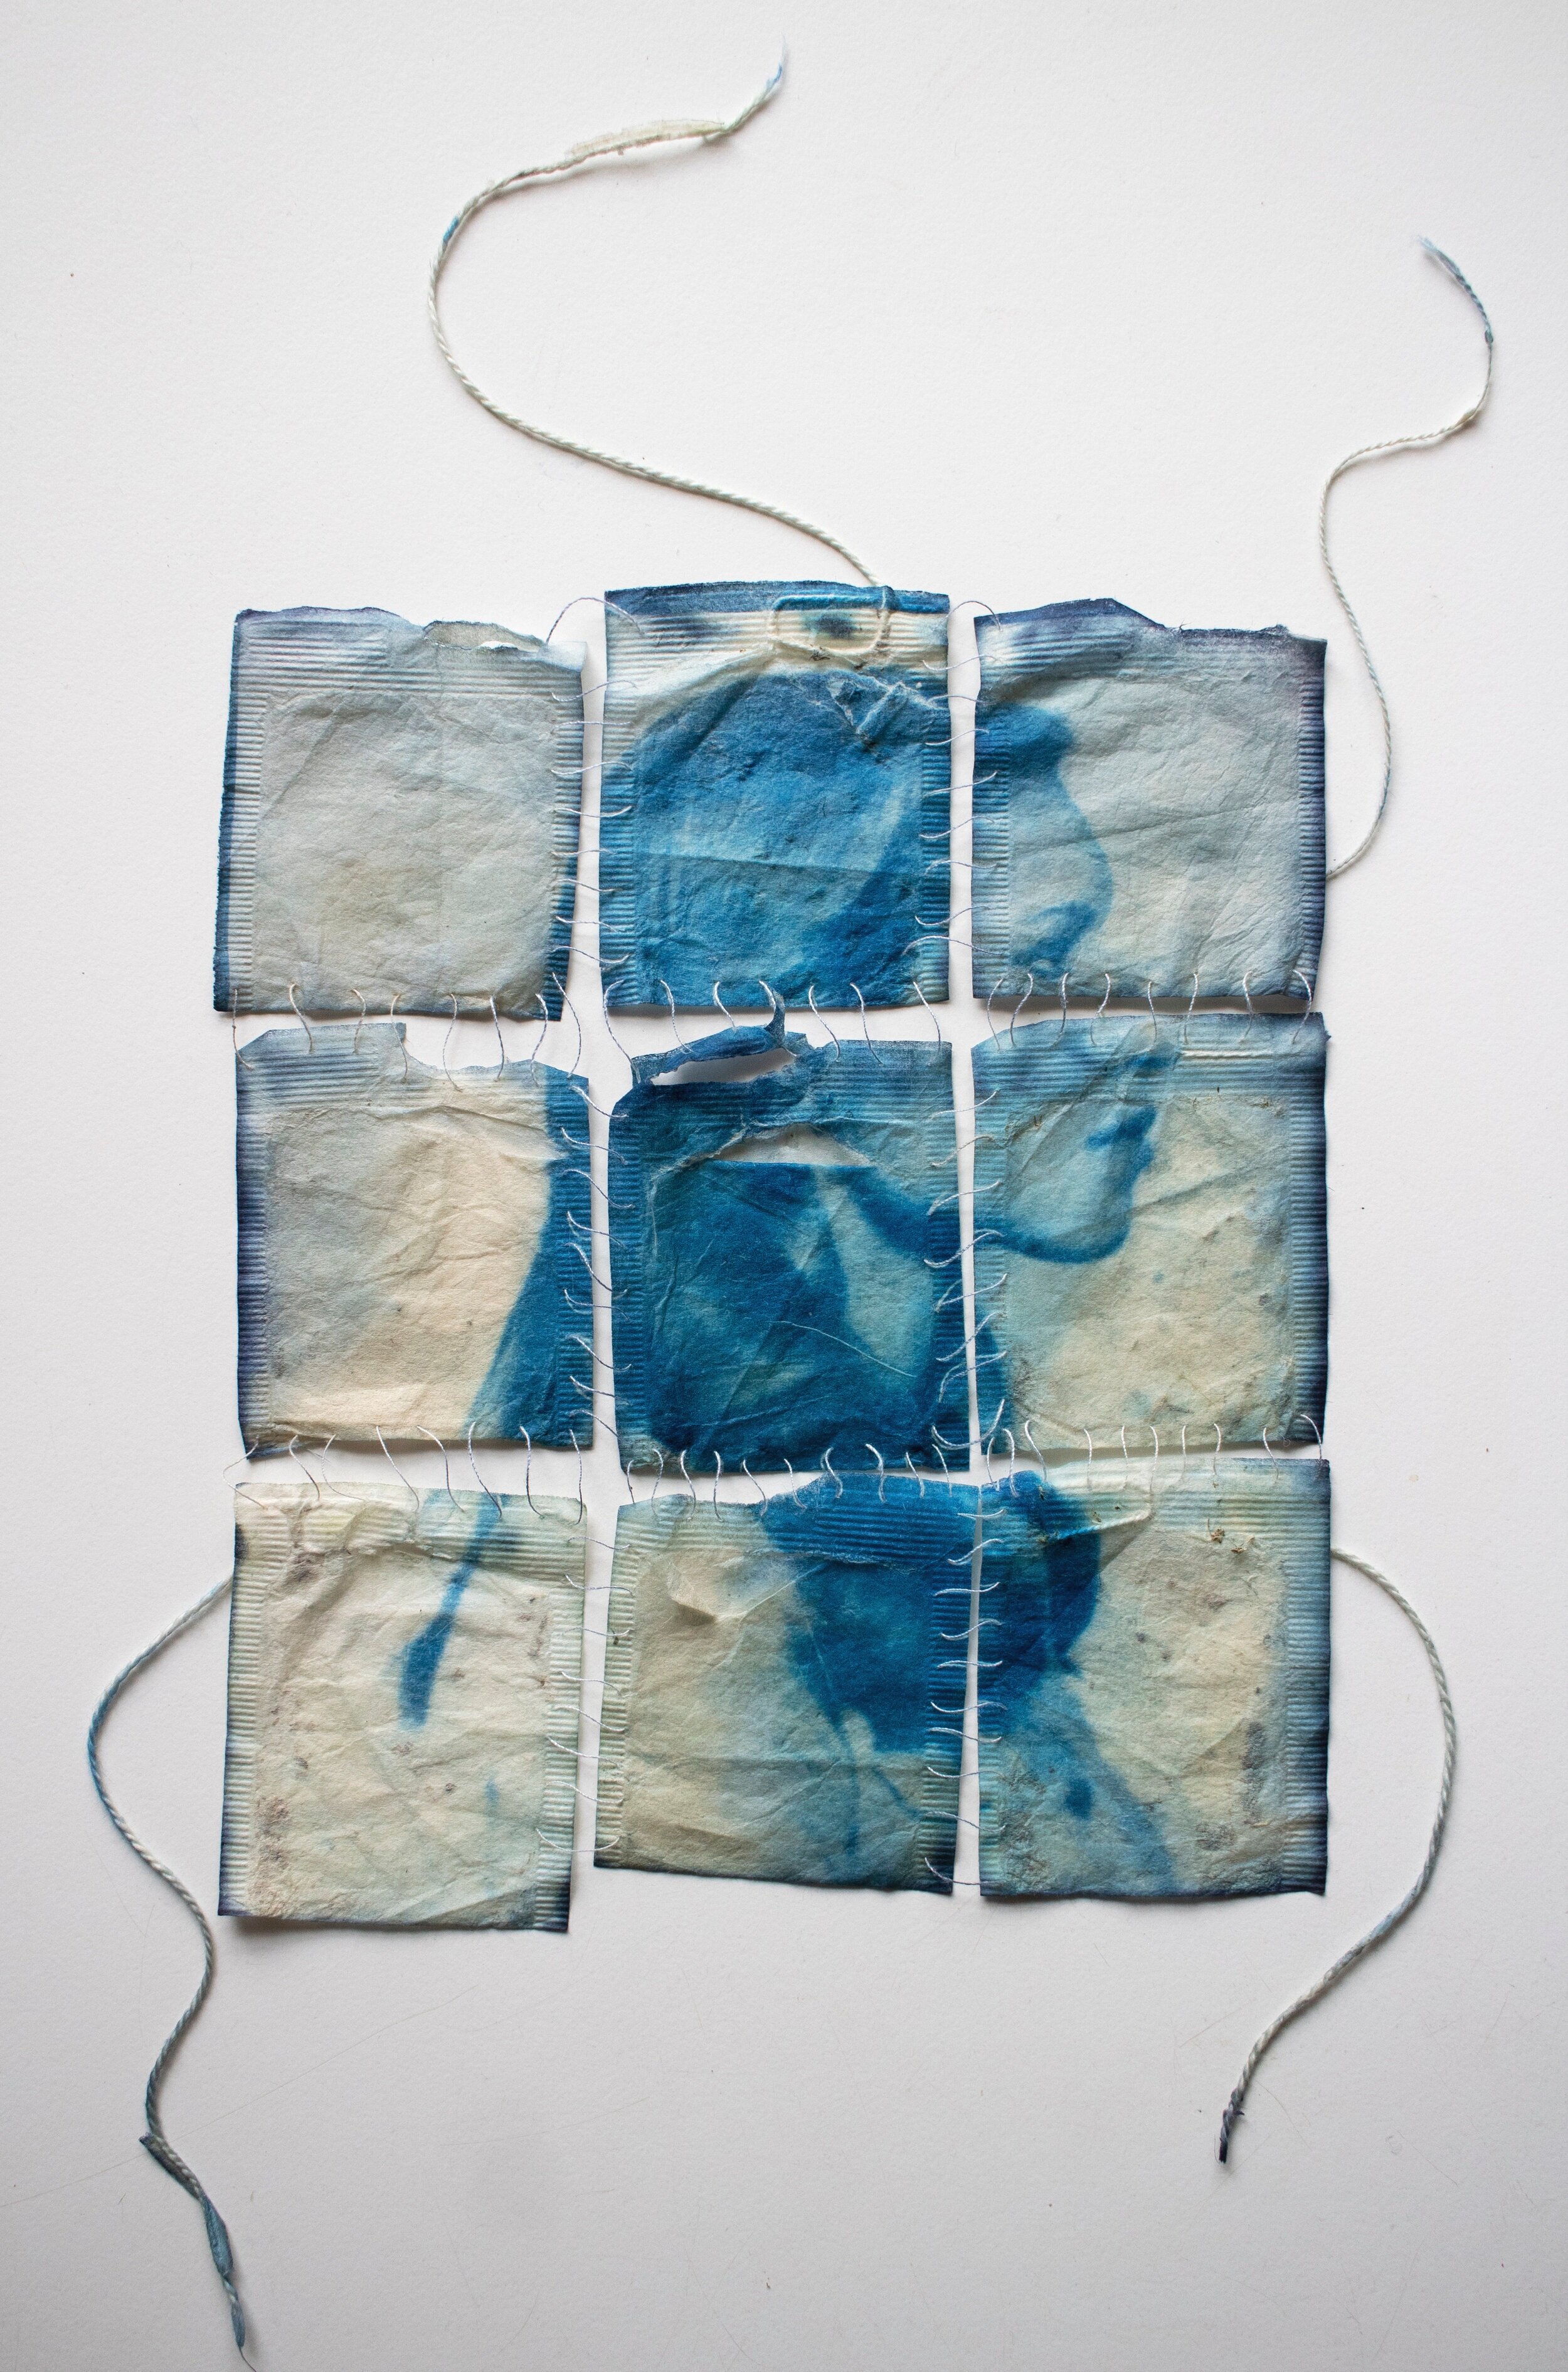    Lineage,   2021  Cyanotype portrait of my mother on the remains of her hierba luisa and manzanilla tea bags, sewn together with my grandmother’s thread 